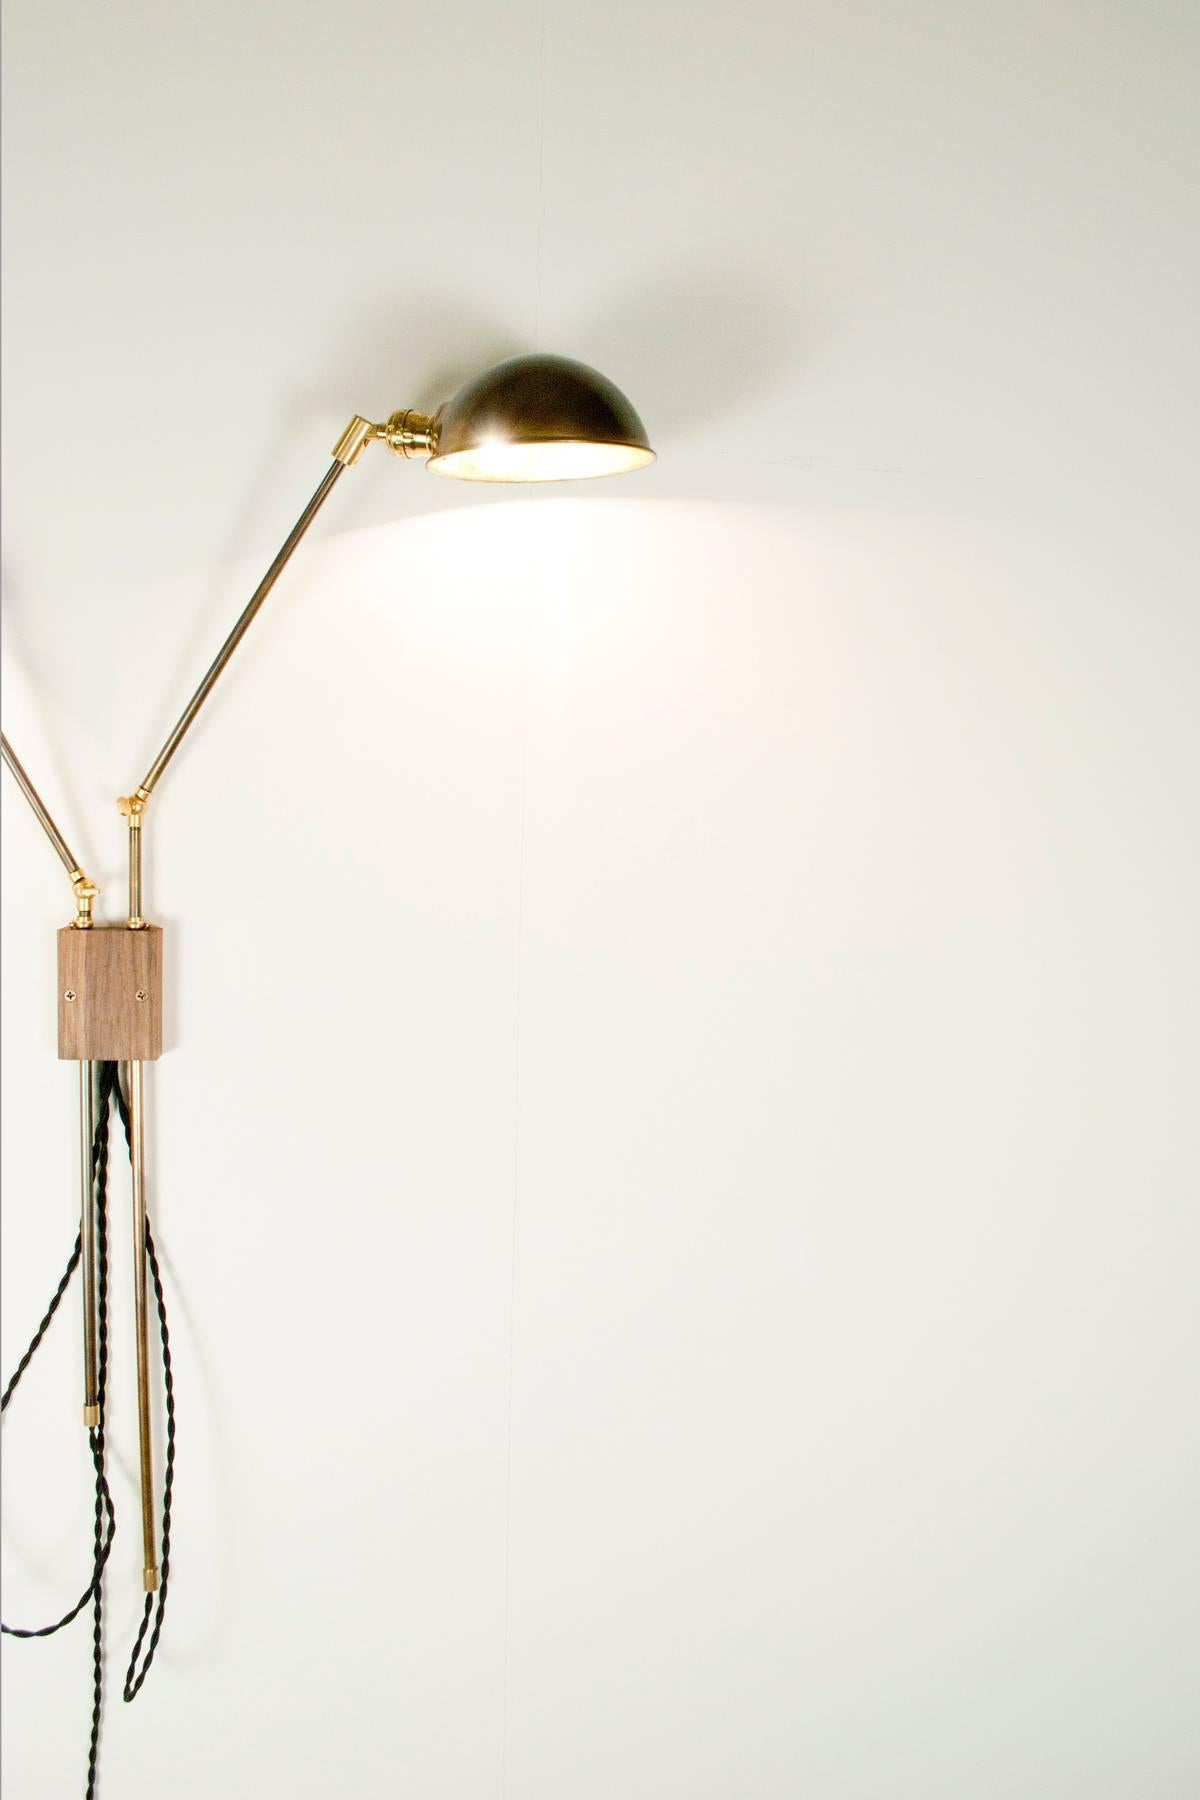 This wall-mounted dual-lamp is comprised of two independently swiveling arms and shades. The darkened brass rods can be adjusted in every possible direction making this a very versatile lamp.

This lamp is extremely customizable in size and